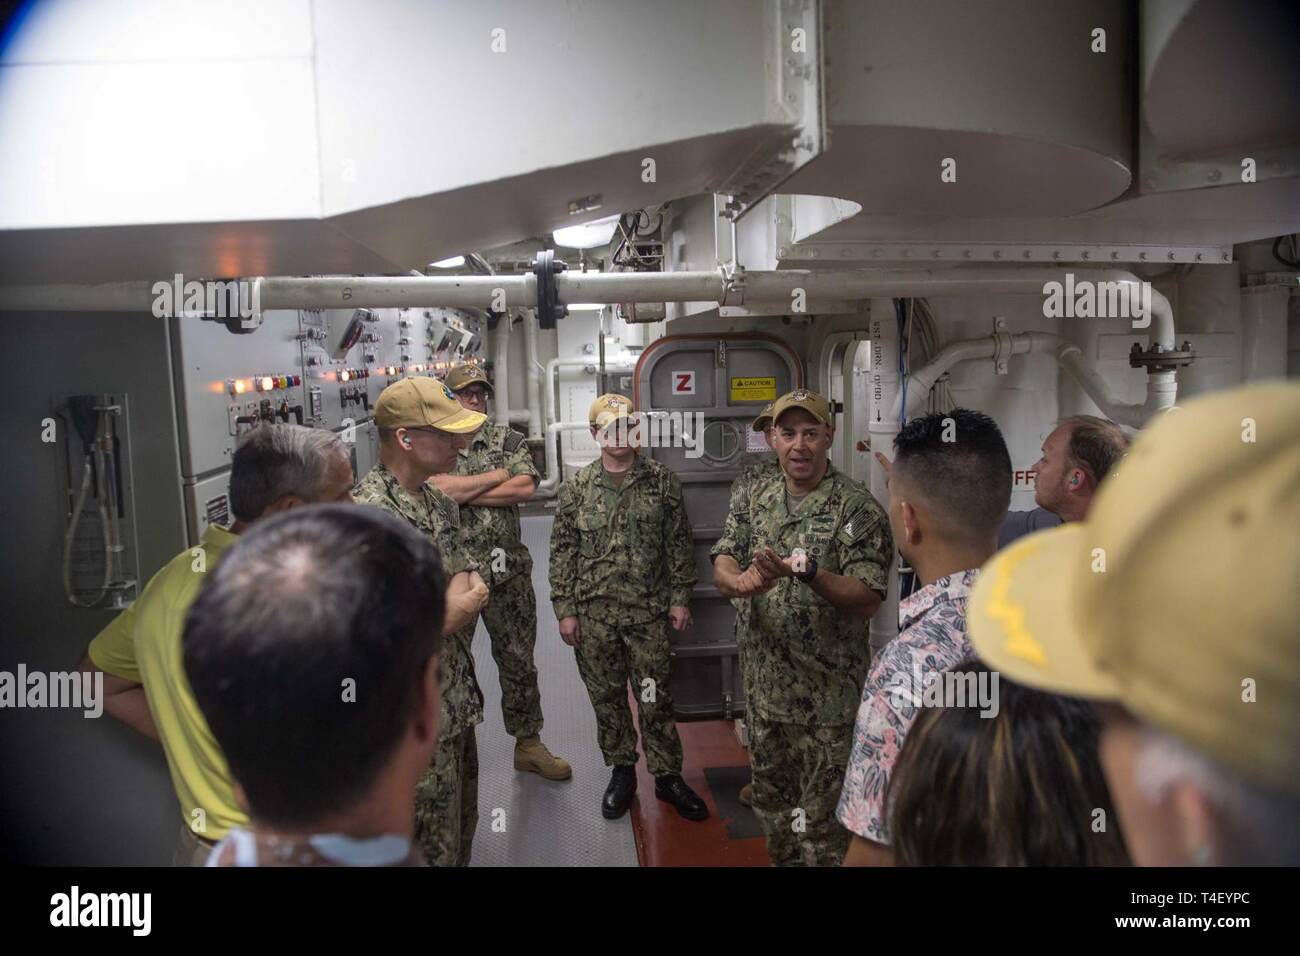 PEARL HARBOR, Hawaii (Apr. 5, 2019) Capt. Carl Andrew Carlson, commanding officer of guided-missile destroyer USS Zumwalt (DDG 1000), speaks during a tour of the ship with Rear Adm. William C. Greene, director, fleet maintenance, U.S. Pacific Fleet. Zumwalt is conducting the port visit as part of its routine operations in the eastern Pacific. Zumwalt-class destroyers provide the Navy with agile military advantages at sea and with ground forces ashore. Stock Photo